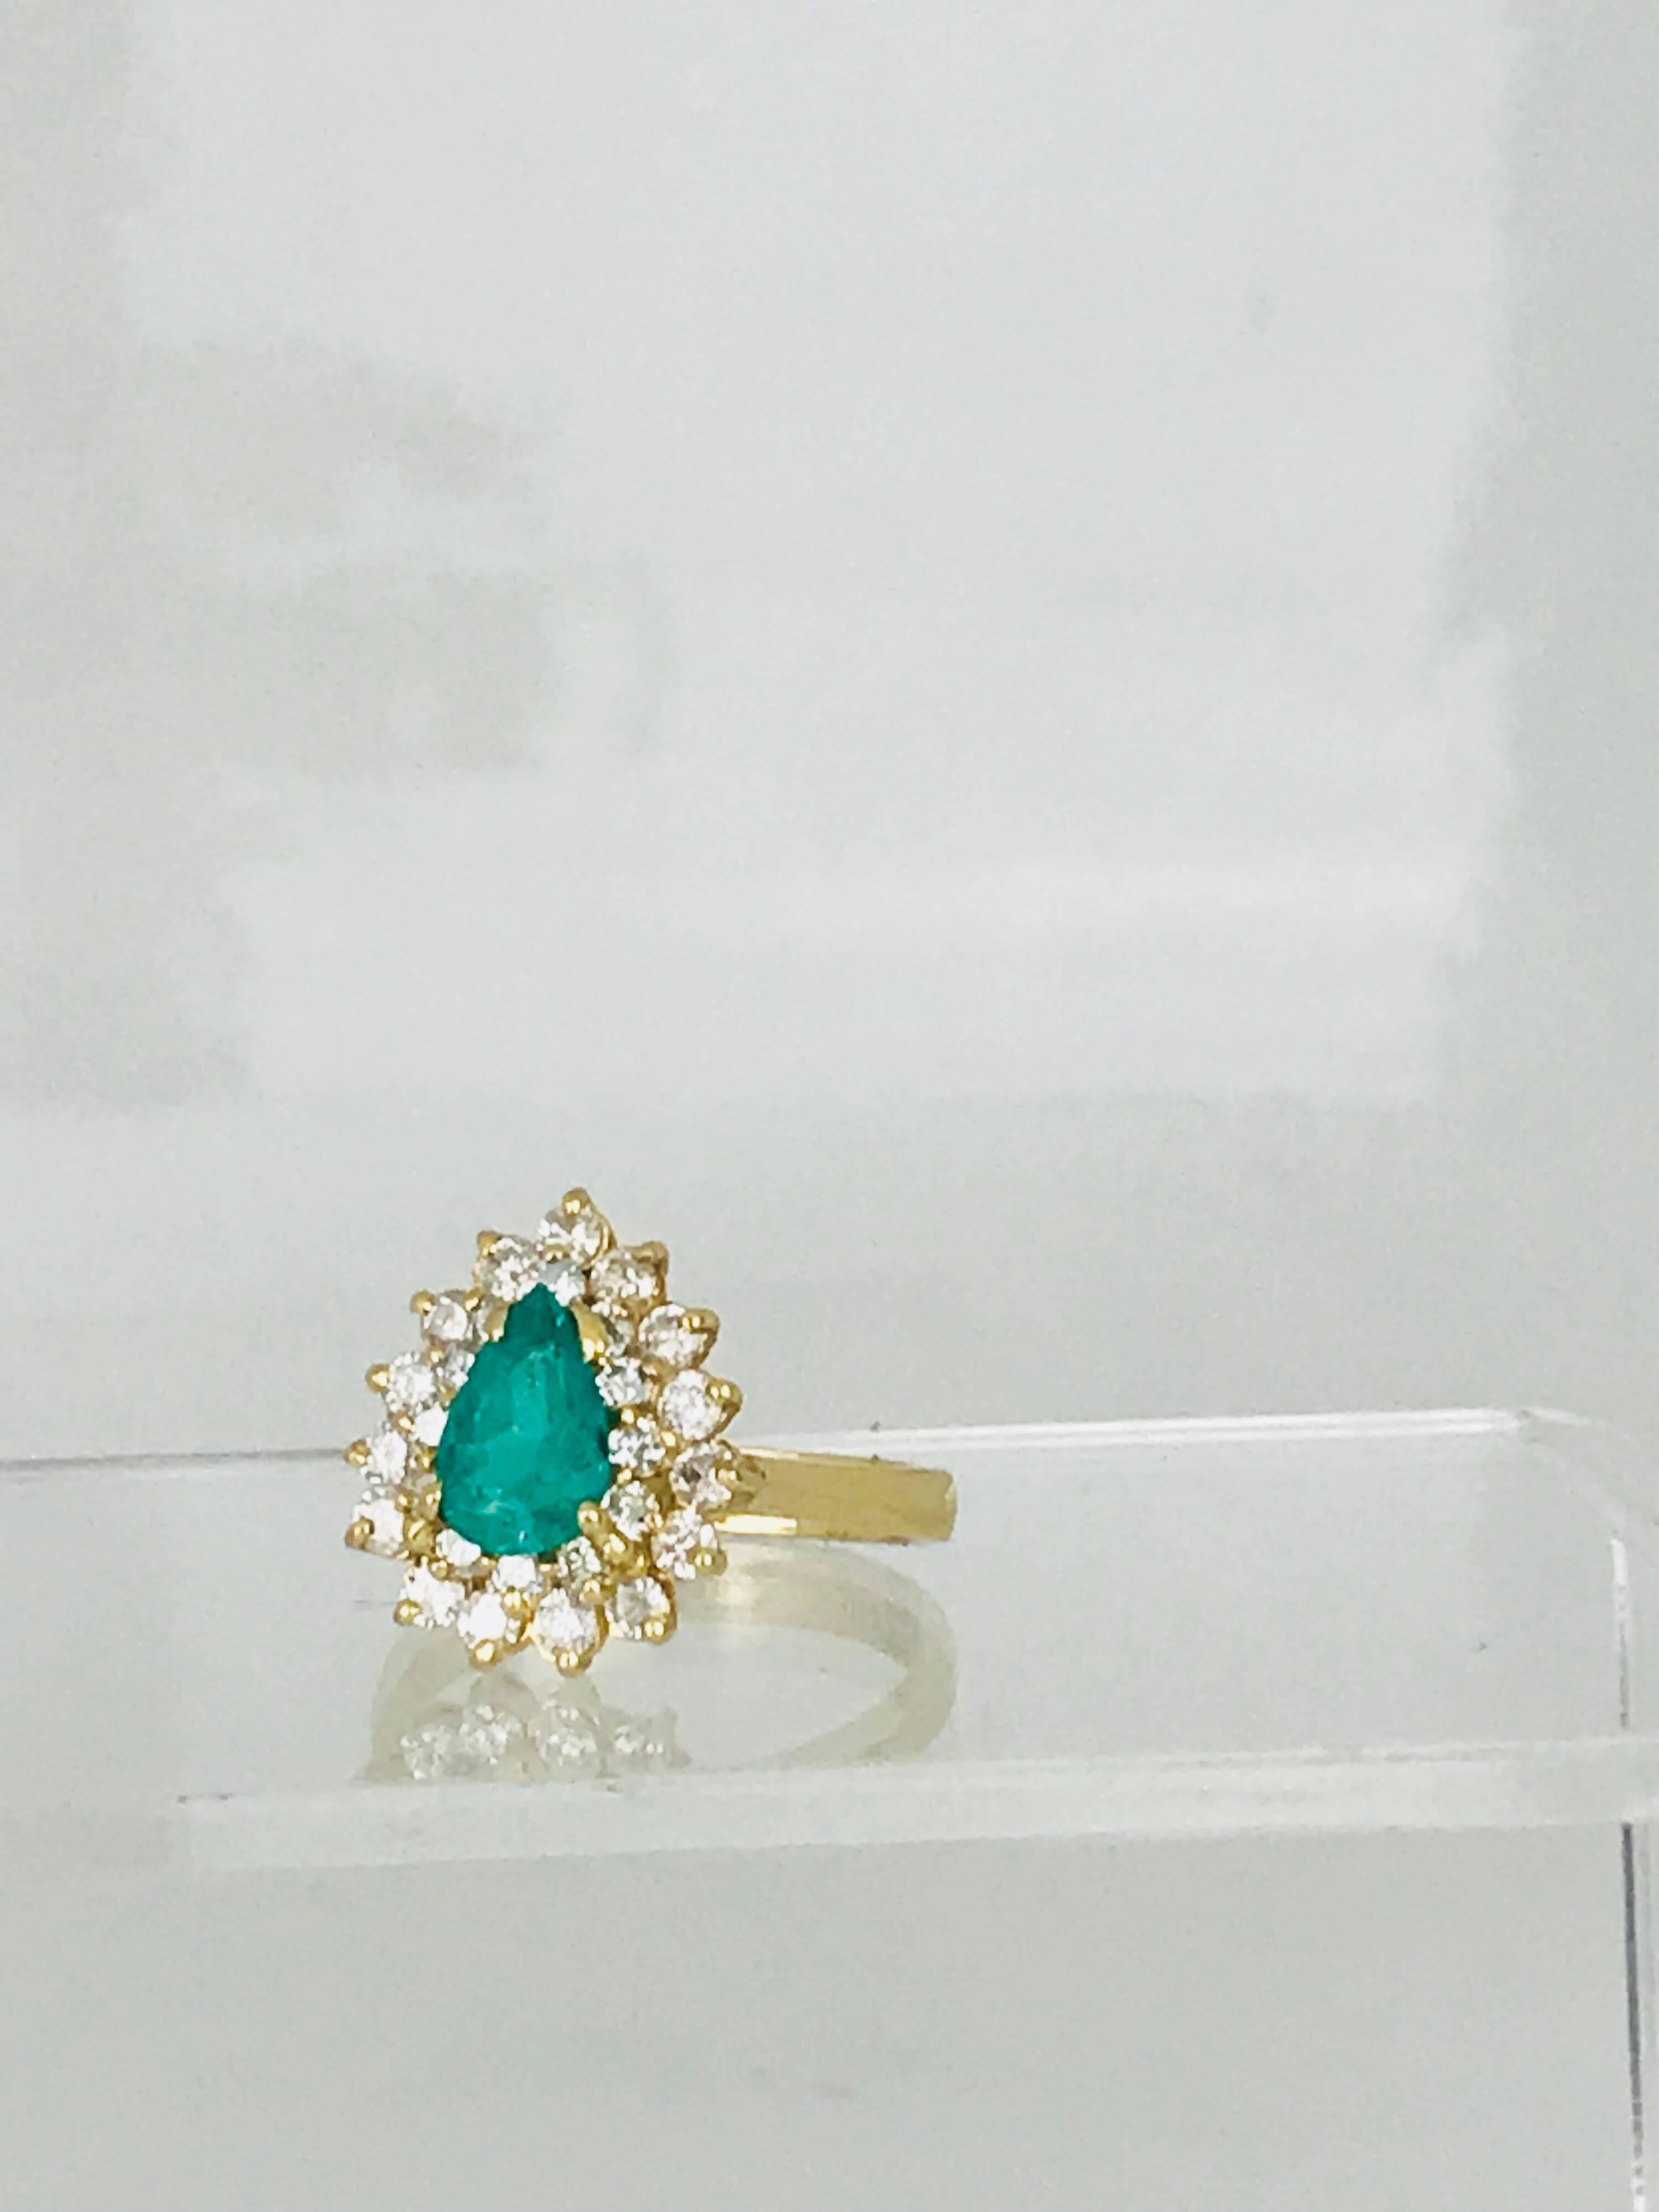 14 karat emerald and diamond cocktail ring. The center emerald is a Colombian origin and measures 5.77-9.02 x 4.00 in diameter. The weight of the emerald is 1.25 carat, approximately.
The accenting (27) round diamonds have a total weight of